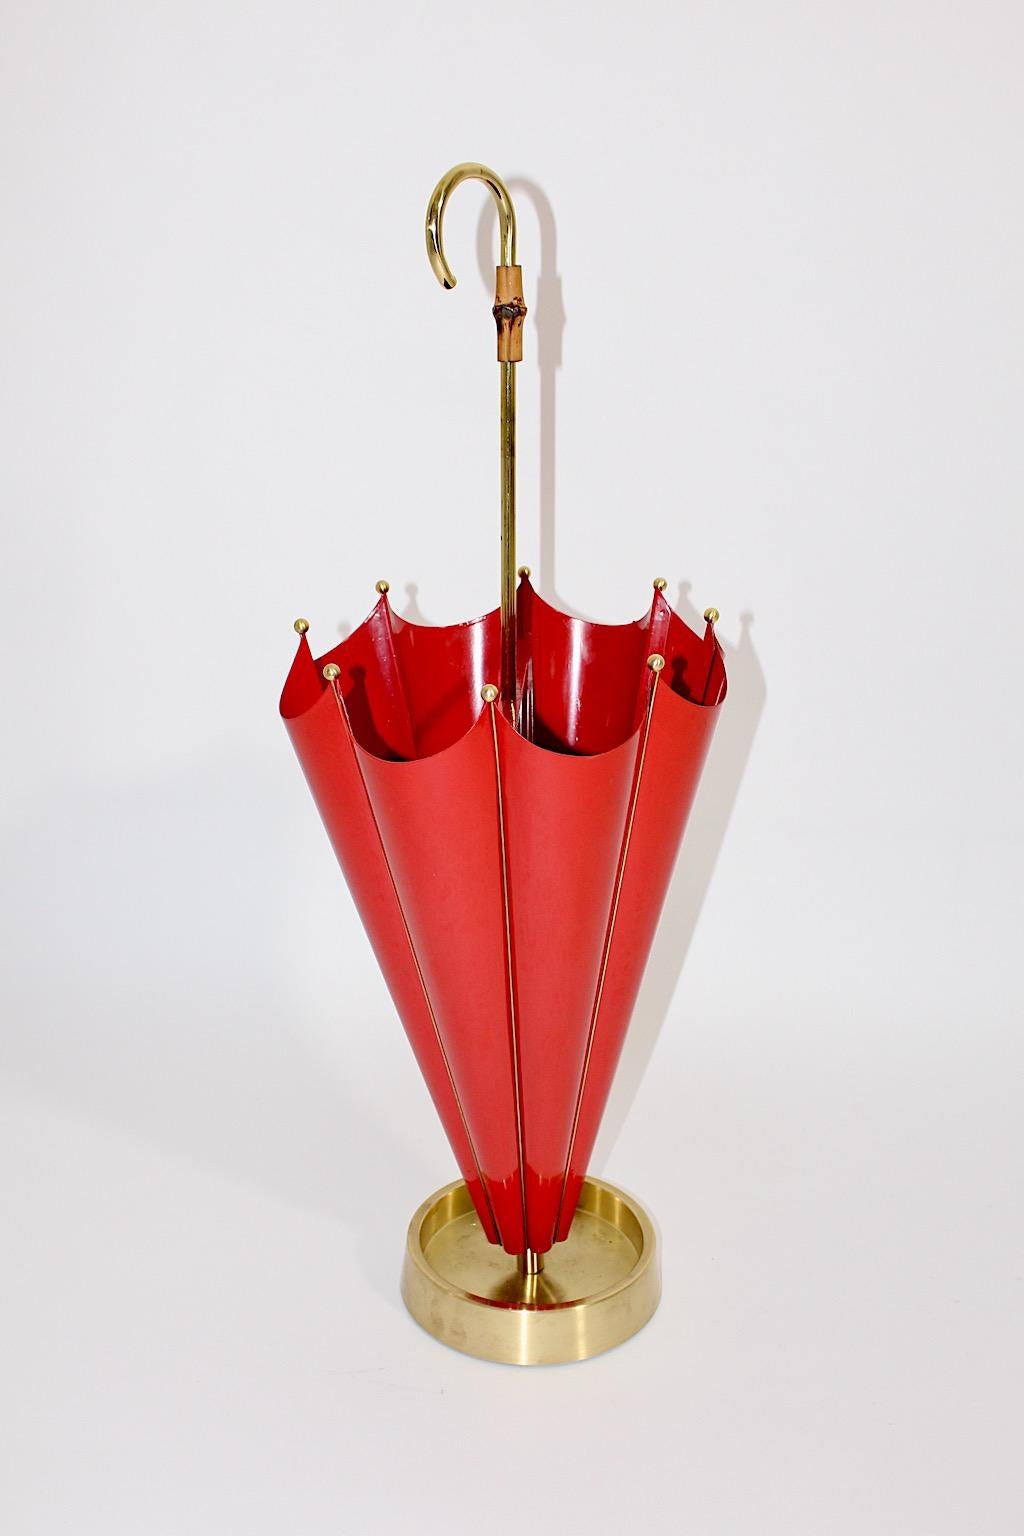 Mid-Century Modern Vintage Red Metal Brass Umbrella Stand Cane Holder 1950 Italy For Sale 1